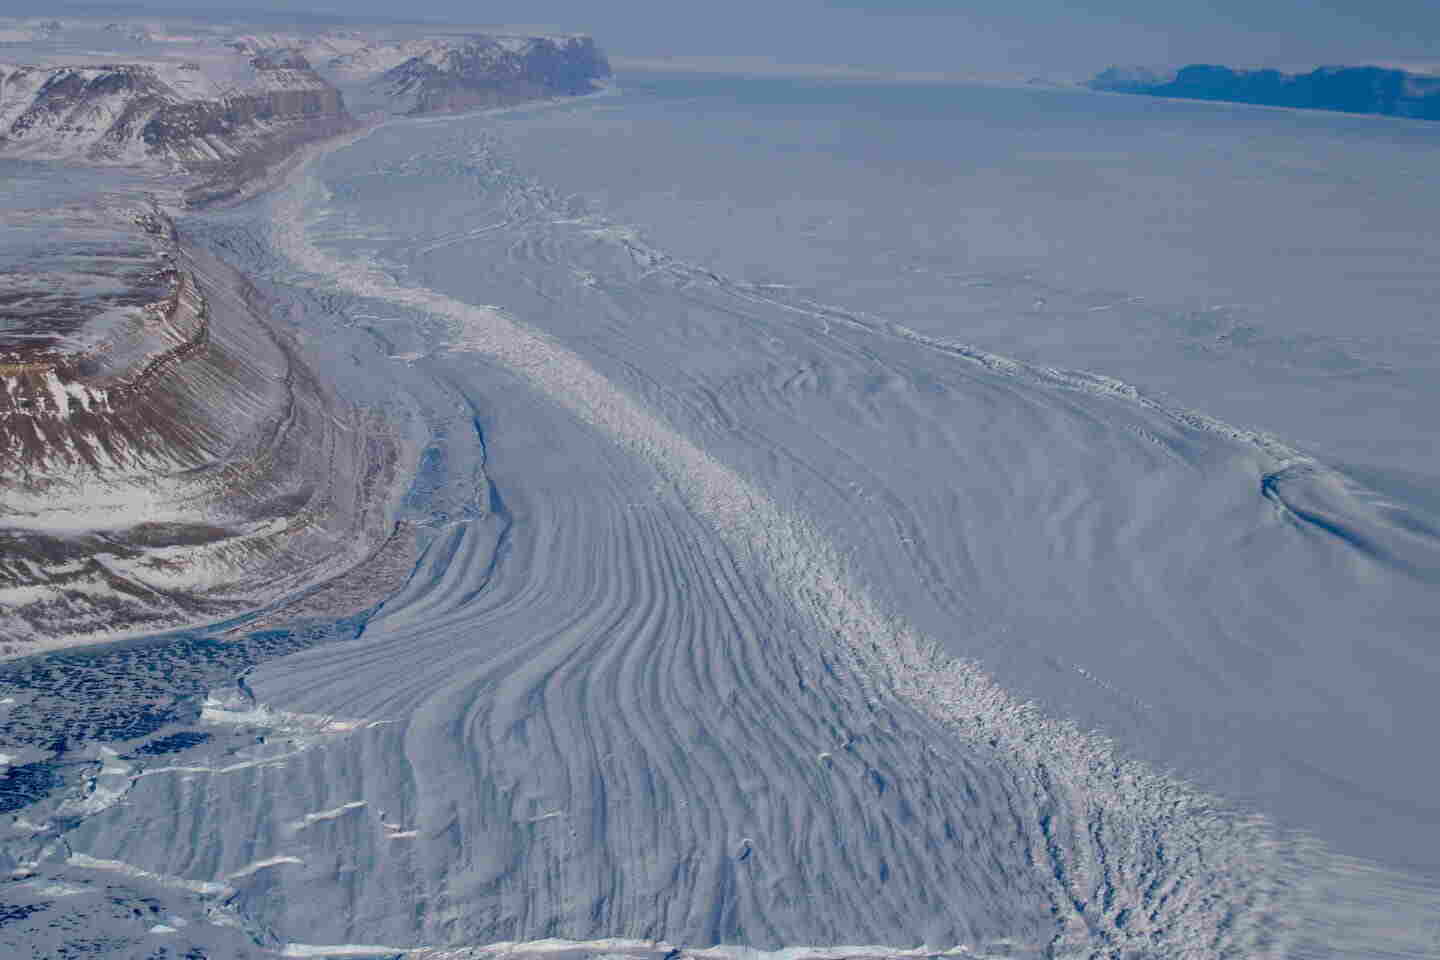 The Petermann Glacier, which accounts for about 4% of the Greenland Ice Sheet, is moving towards the Arctic Ocean. A recent study, which involved observations and supercomputer modeling, has shown that the glacier is more susceptible to warm ocean water intrusion underneath it than previously thought. This can lead to increased melting and potentially worsen future sea level rise. The study was conducted by Eric Rignot from UCI.